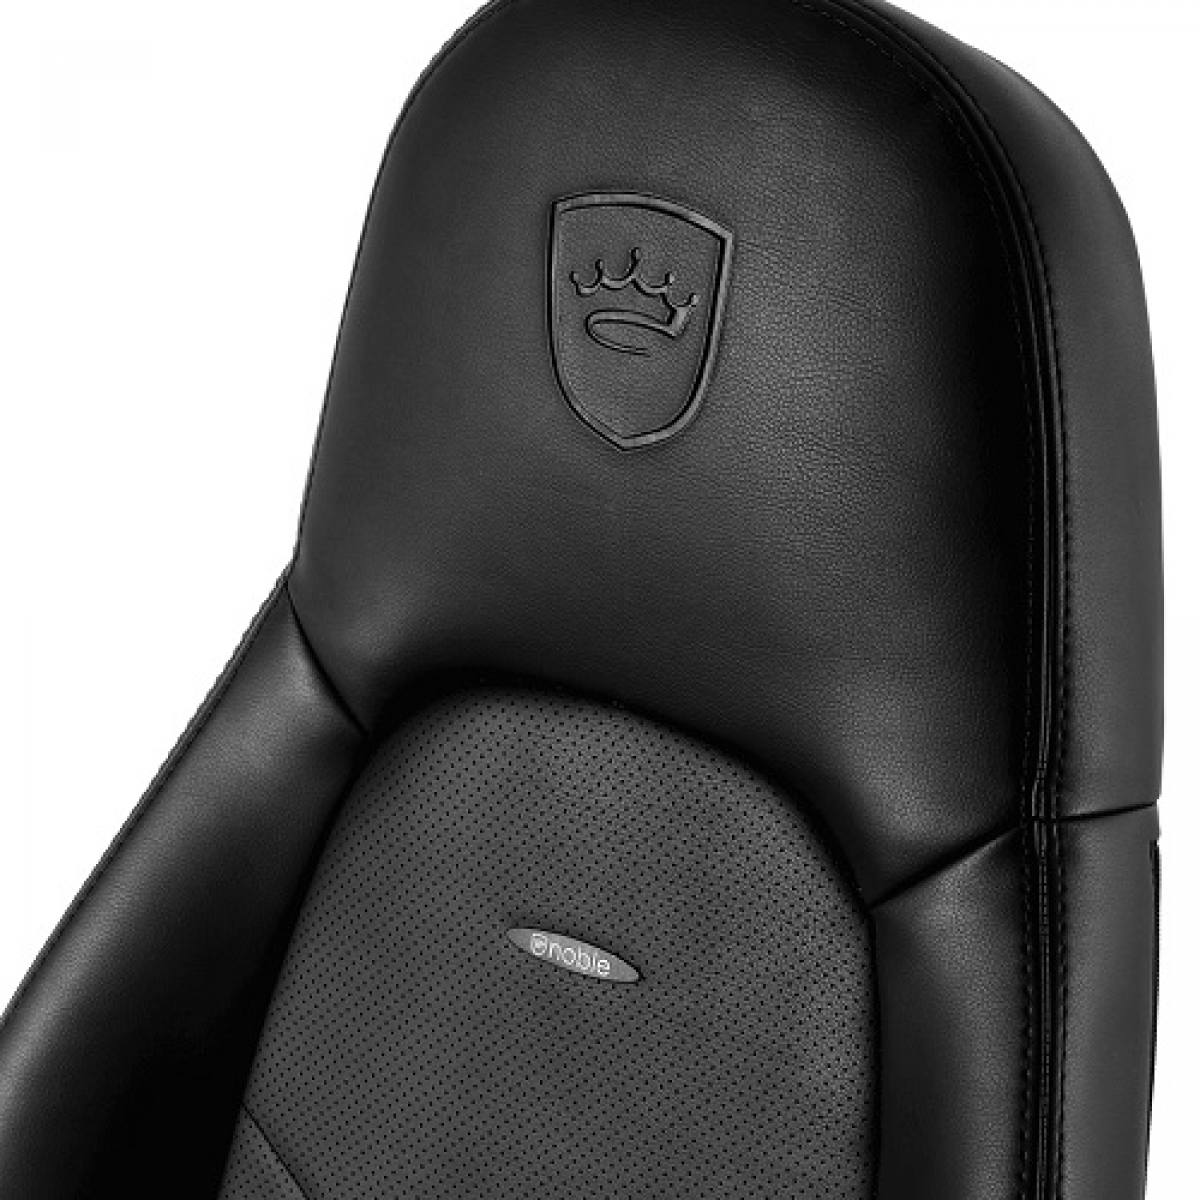 NOBLECHAIRS ICON SERIES - BLACK